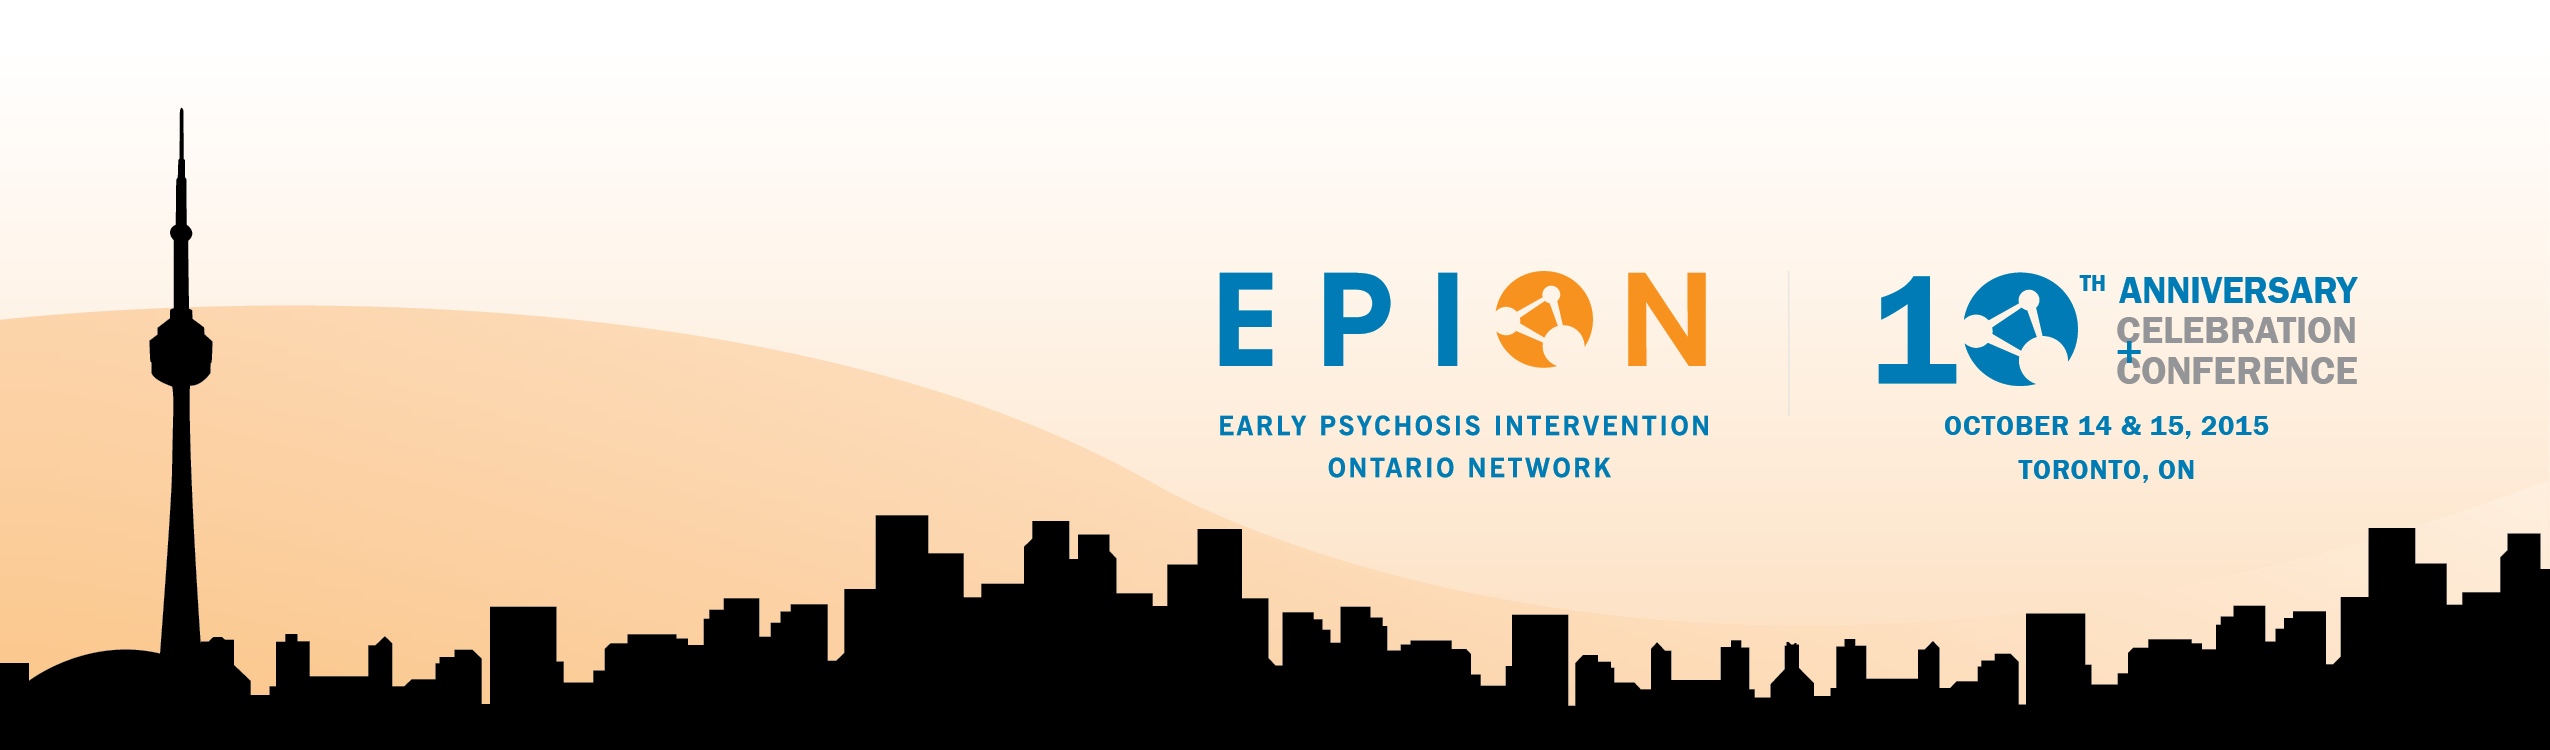 EPION - Early Psychosis Intervention Ontario Network - 10th Anniversary Celebration and Conference #EPION2015